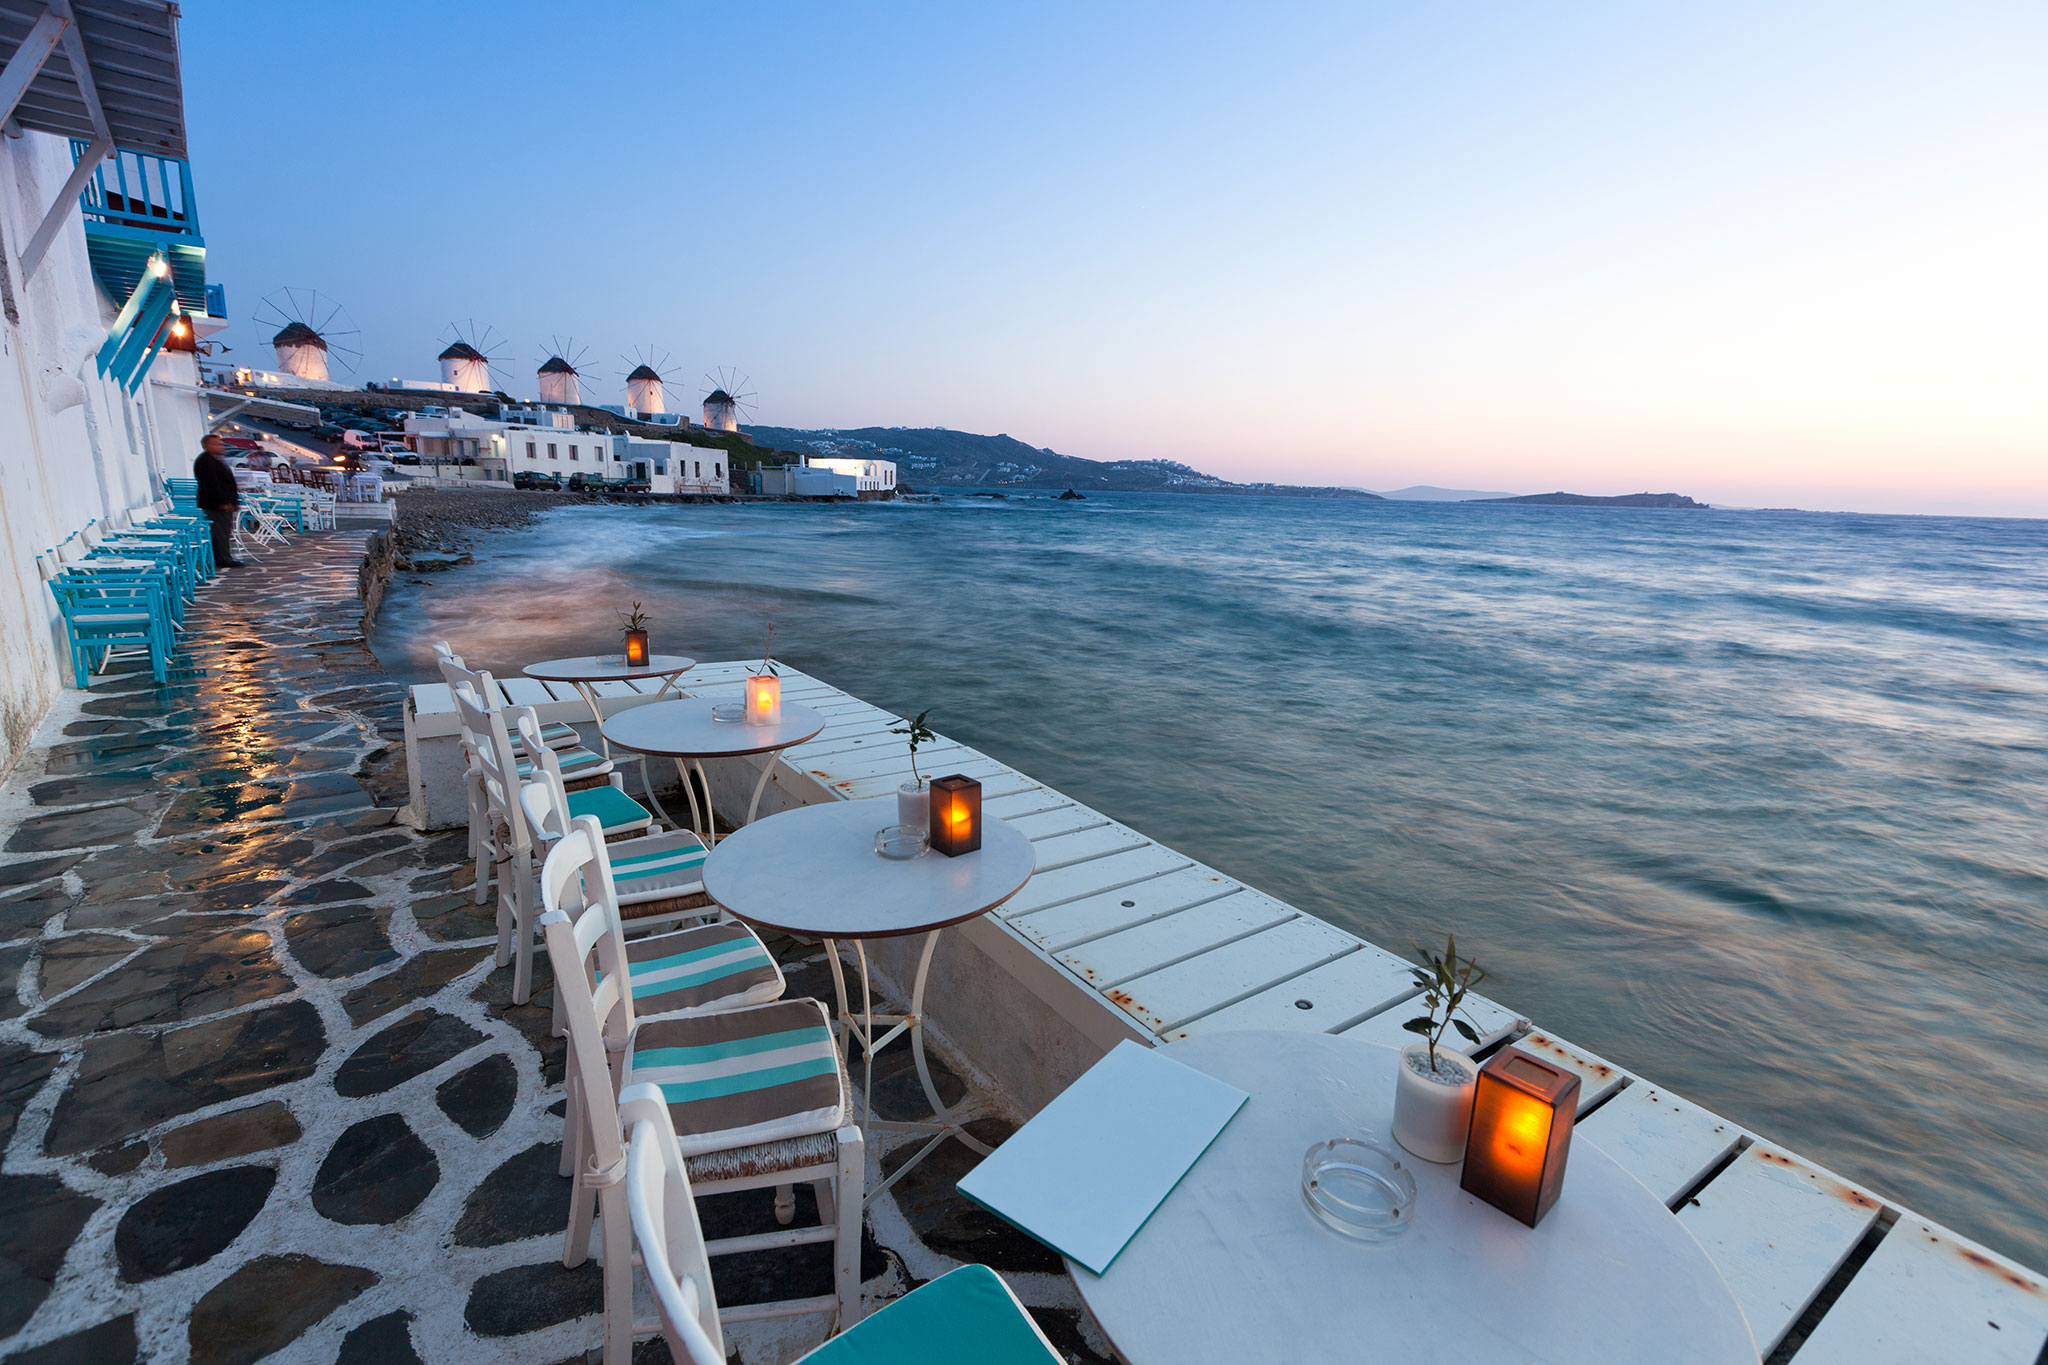 Tables and chairs overlook the Mediterranean at dusk in Mykonos.